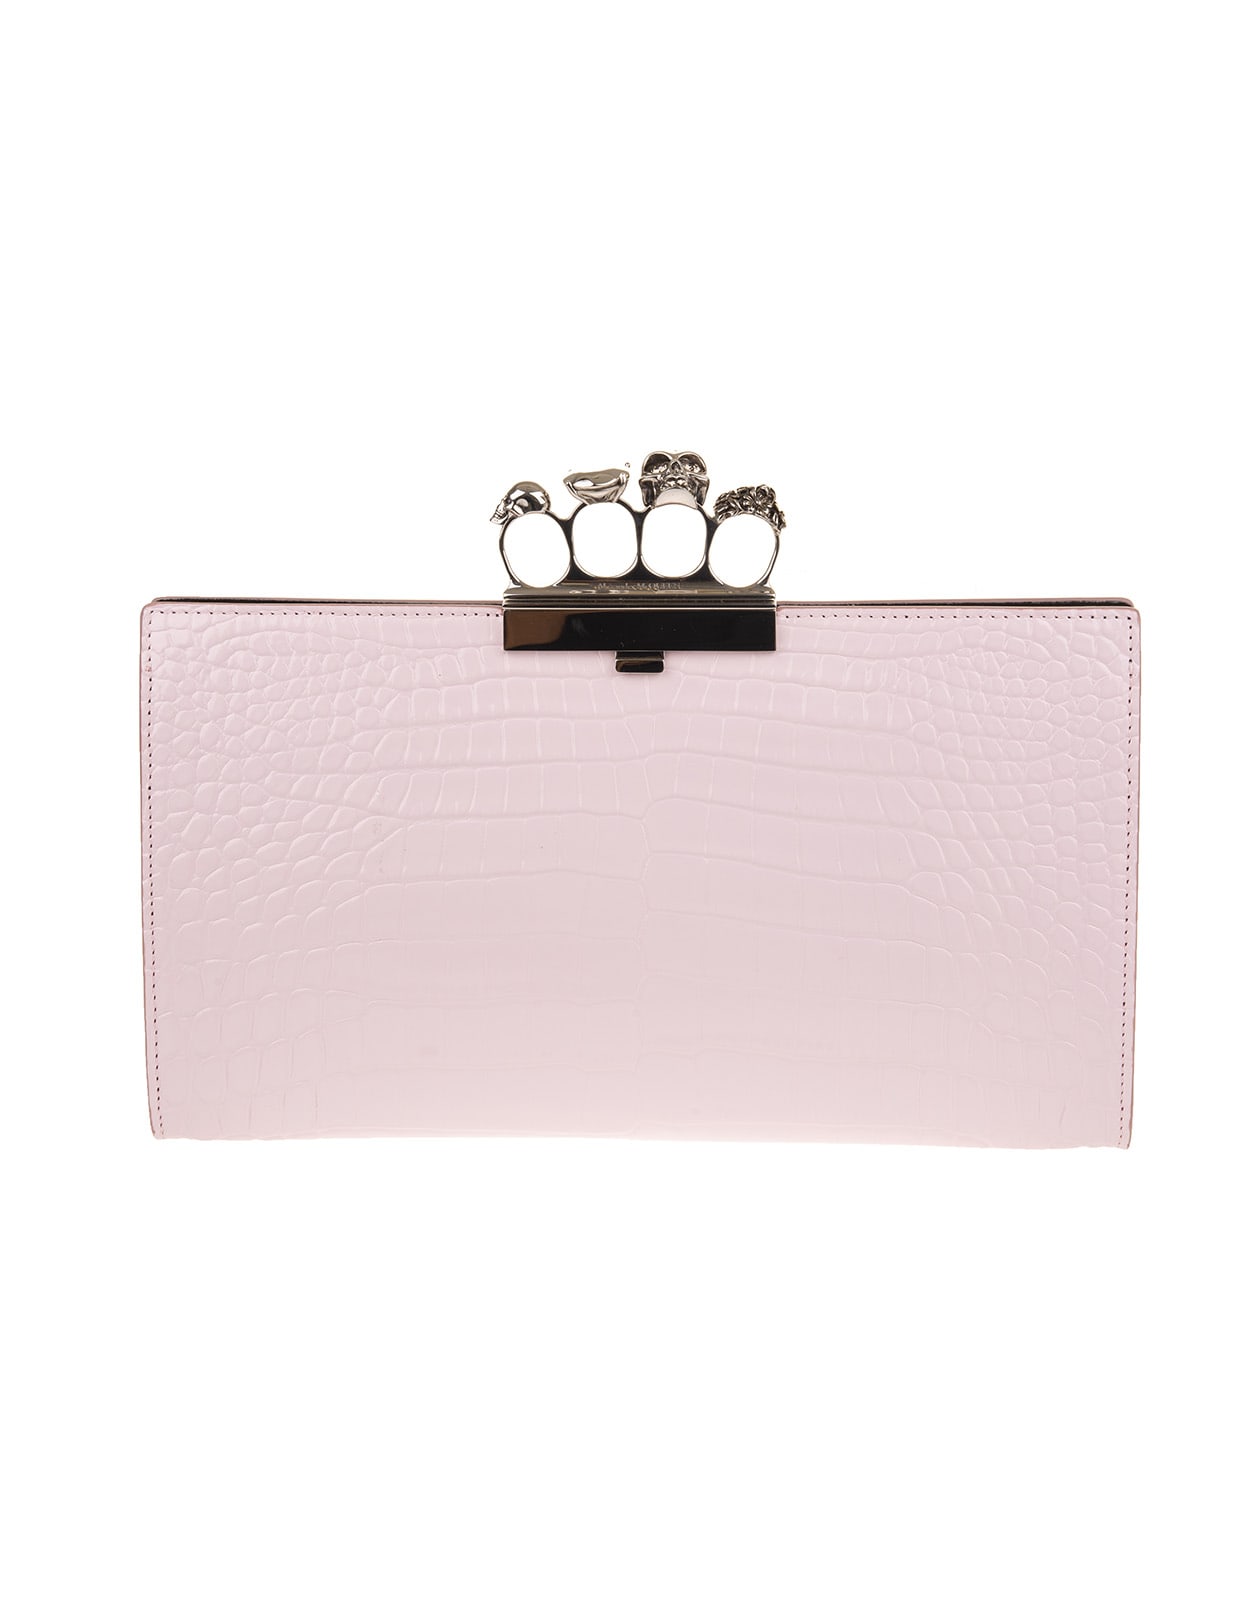 Alexander McQueen Pink Four-ring Skull Flat Clutch With Crocodile Effect